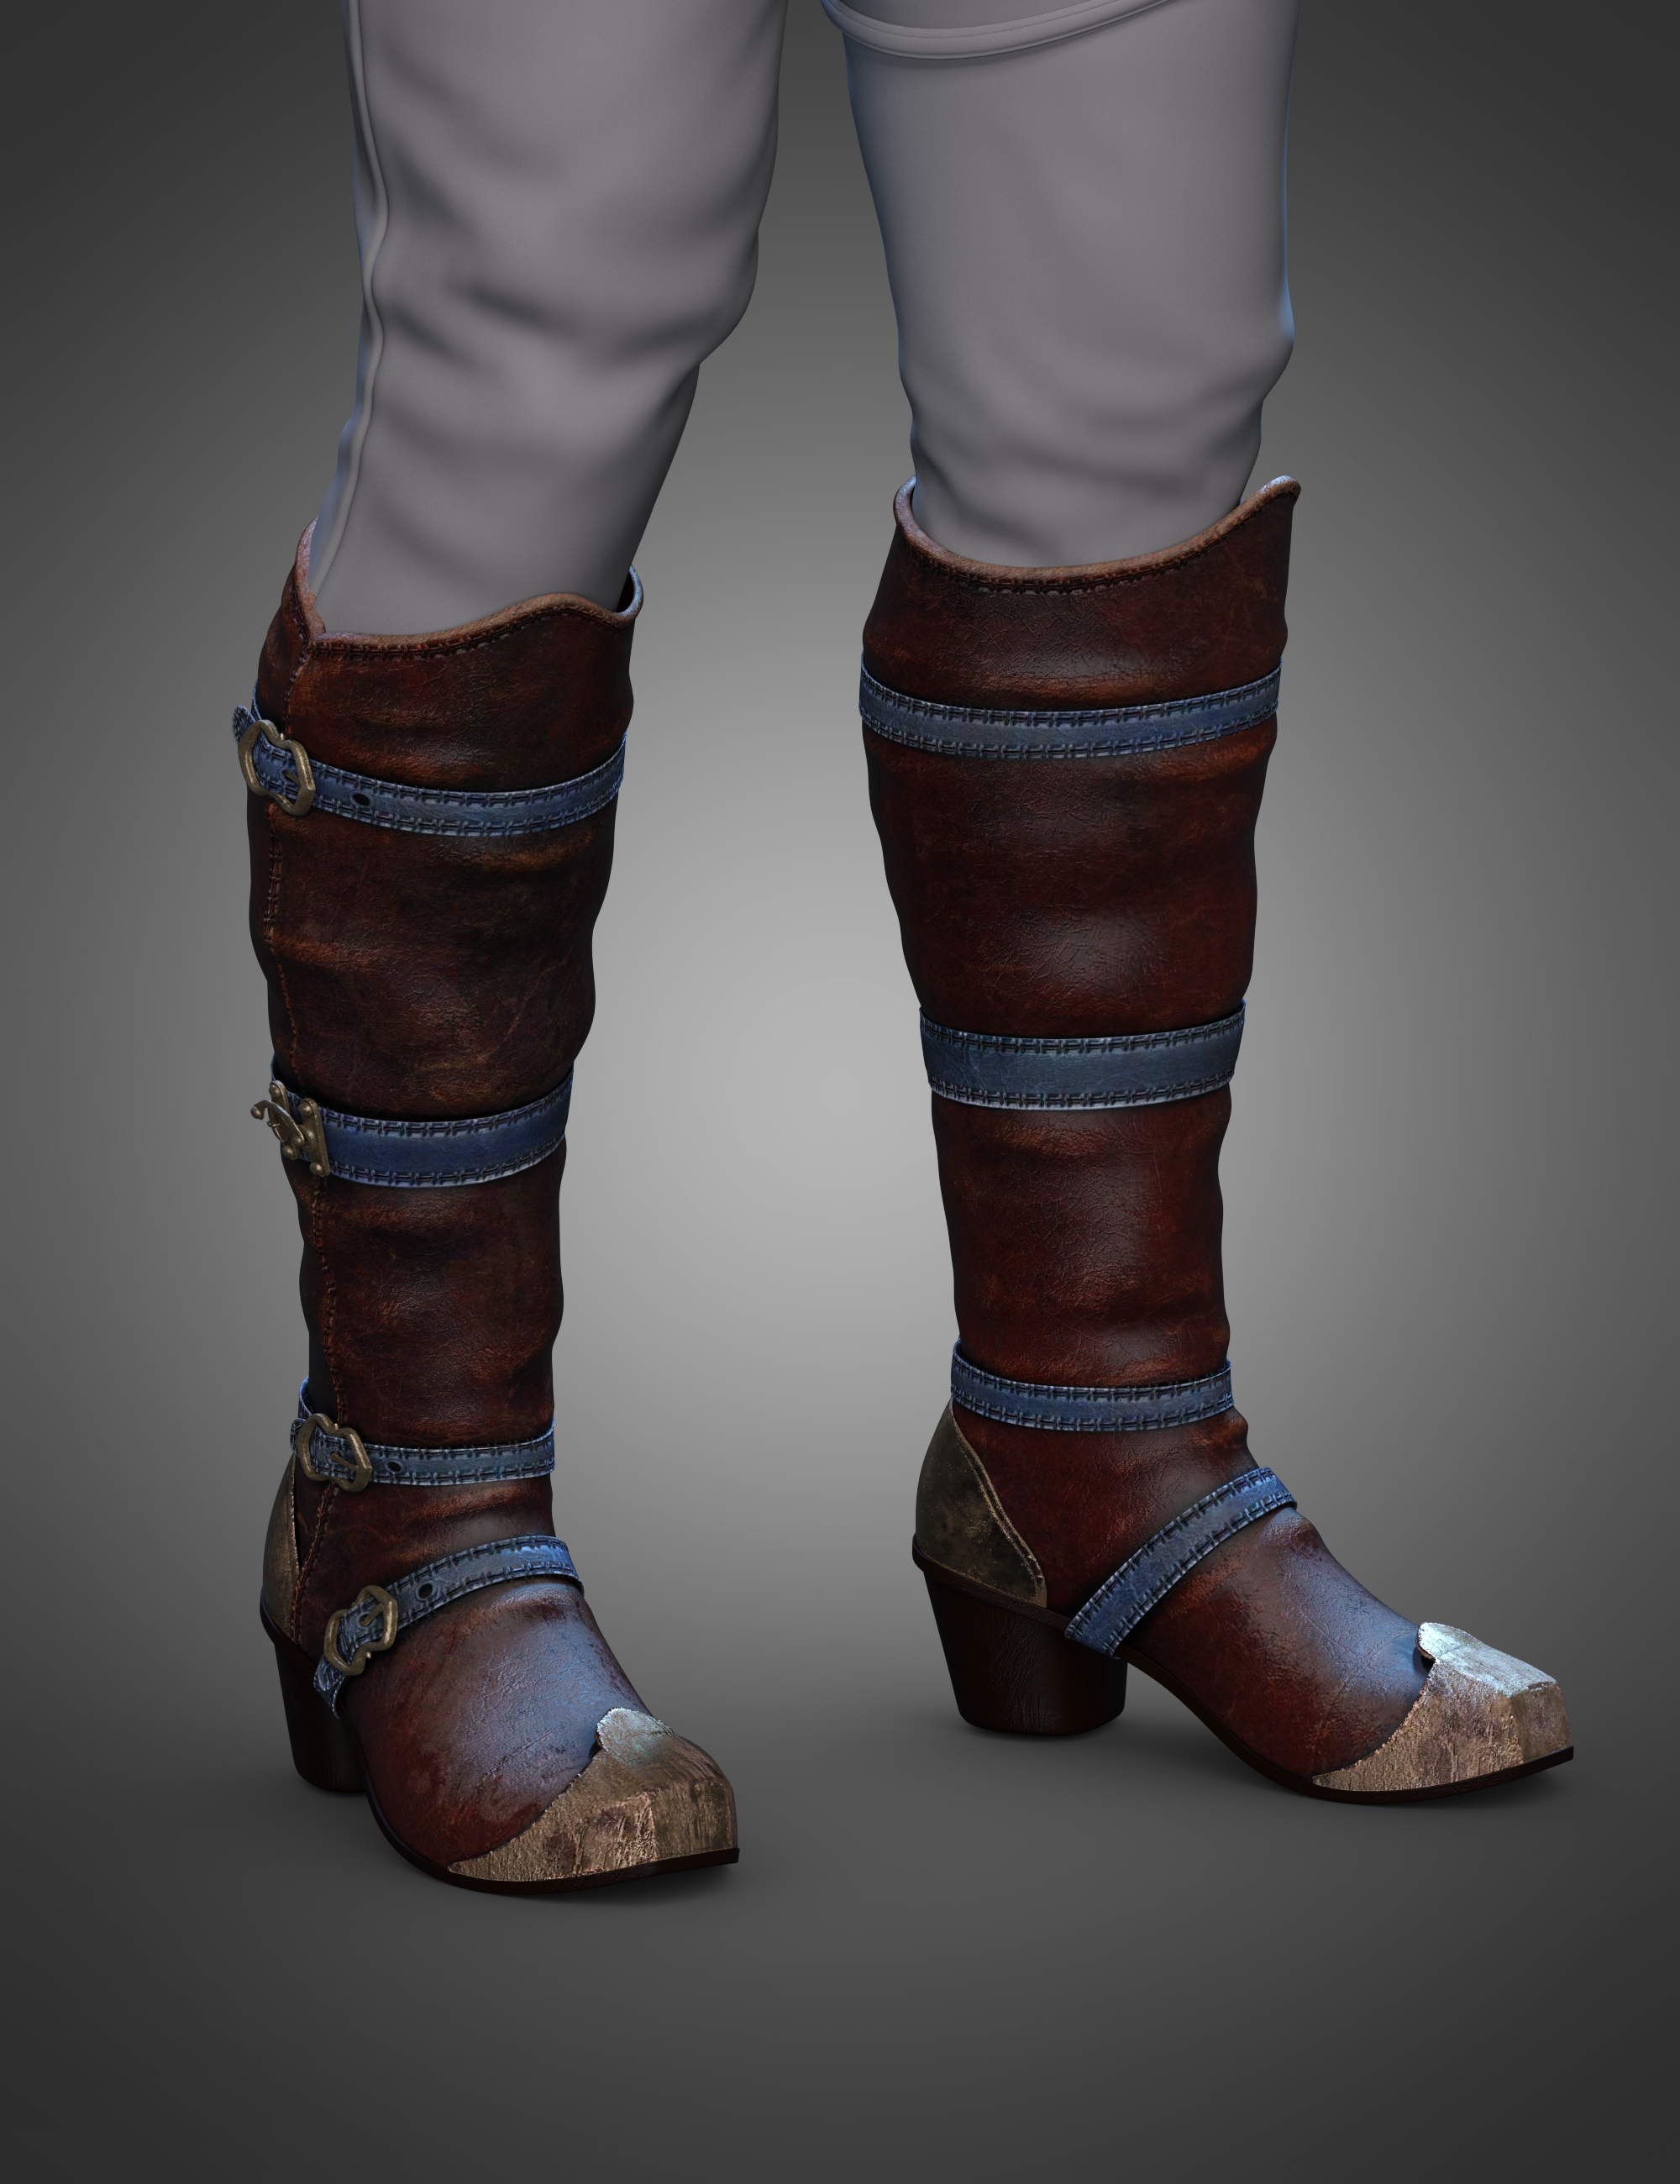 Halcyon Fragment Boots for Genesis 8 and 8.1 Males